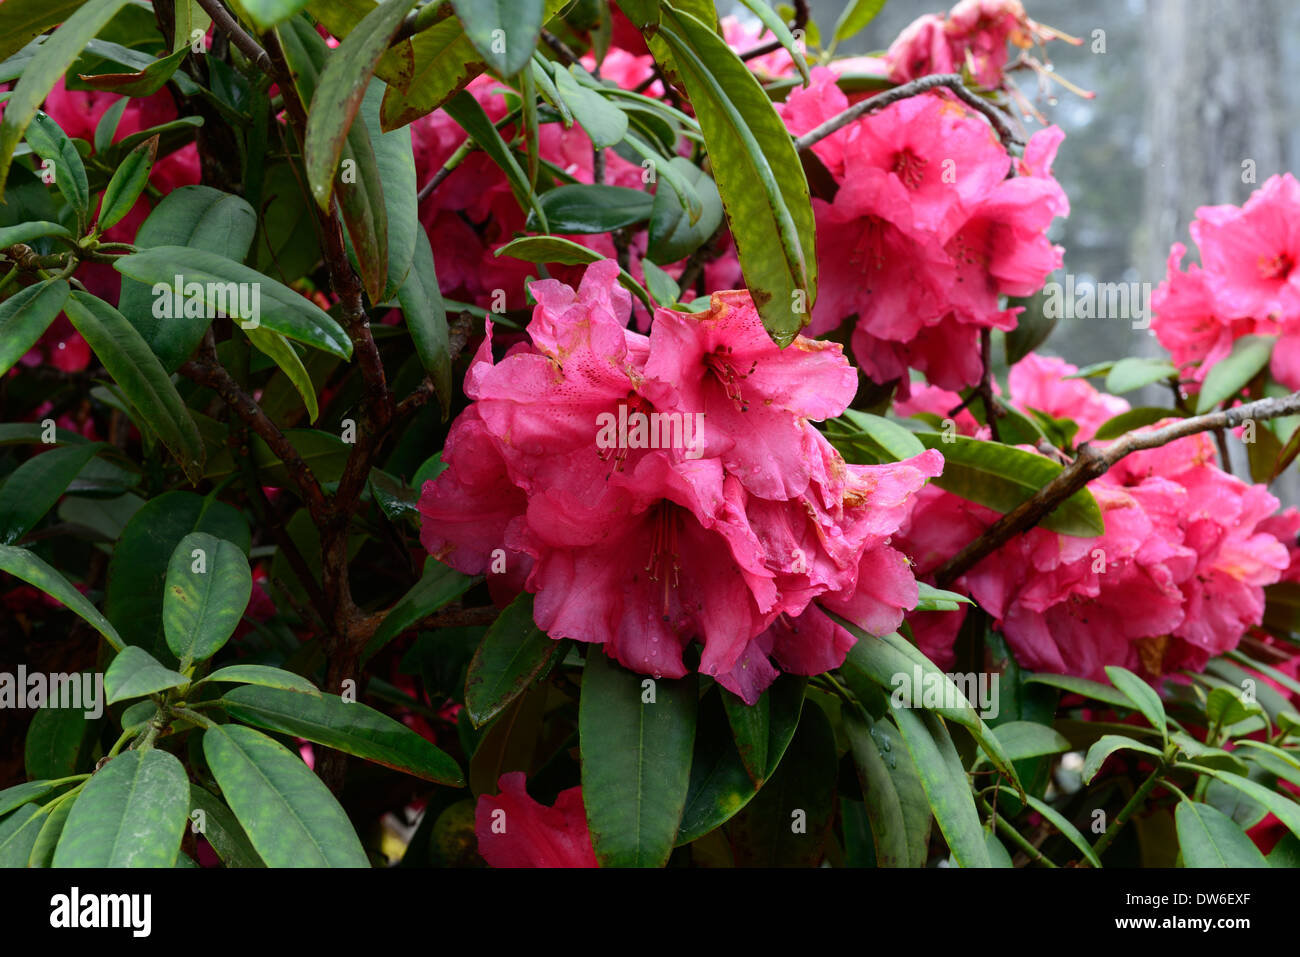 rhododendron fort bragg glow red pink flowers flower flowering evergreen green leaves foliage tree trees Stock Photo